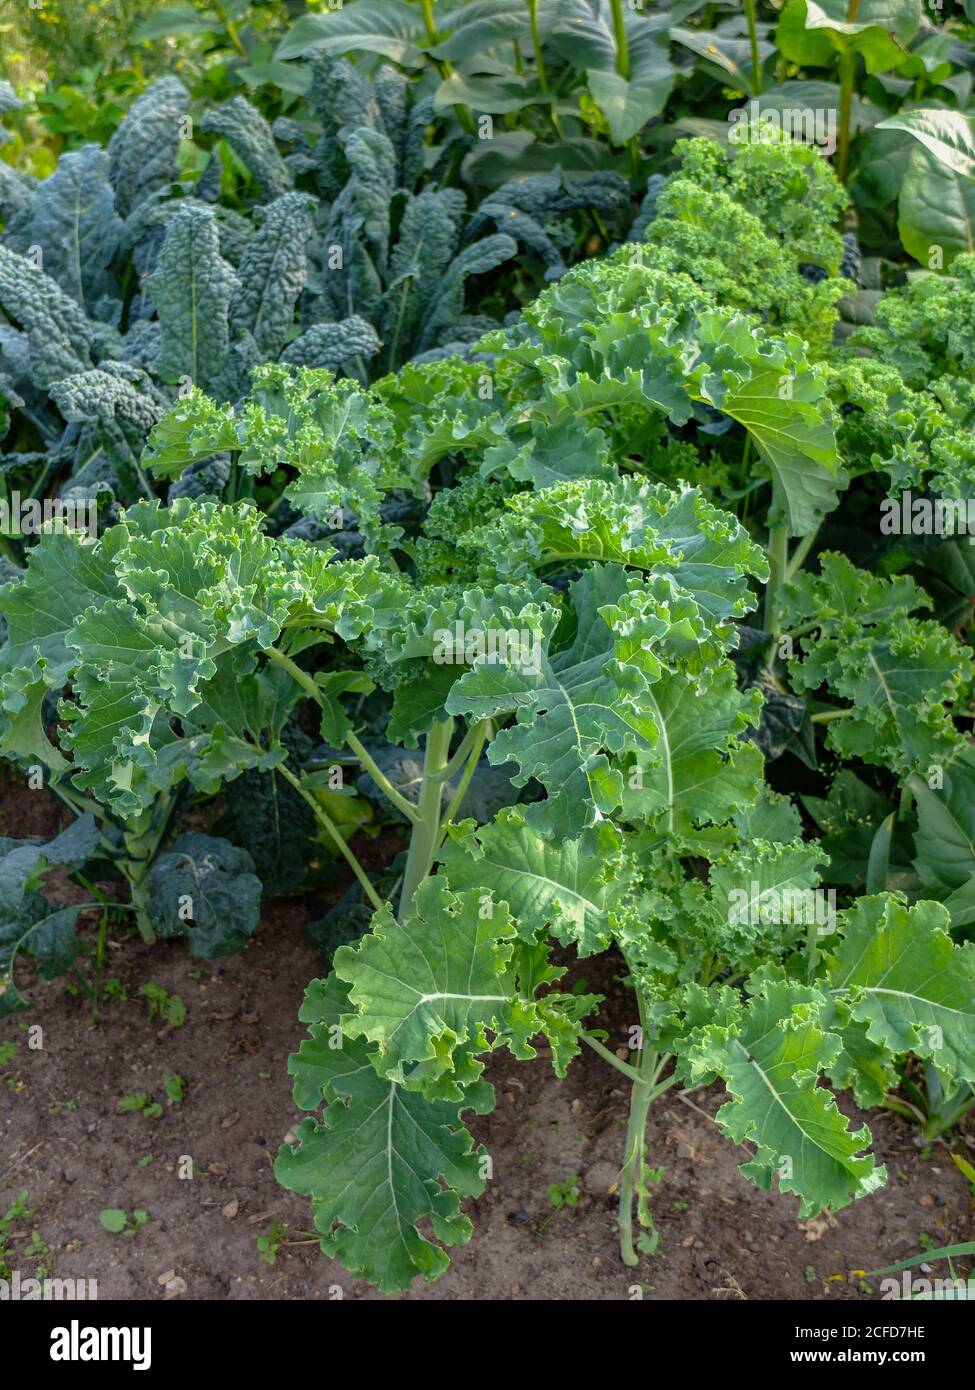 Kale (Brassica oleracea var. Sabellica) with palm cabbage in the vegetable patch Stock Photo